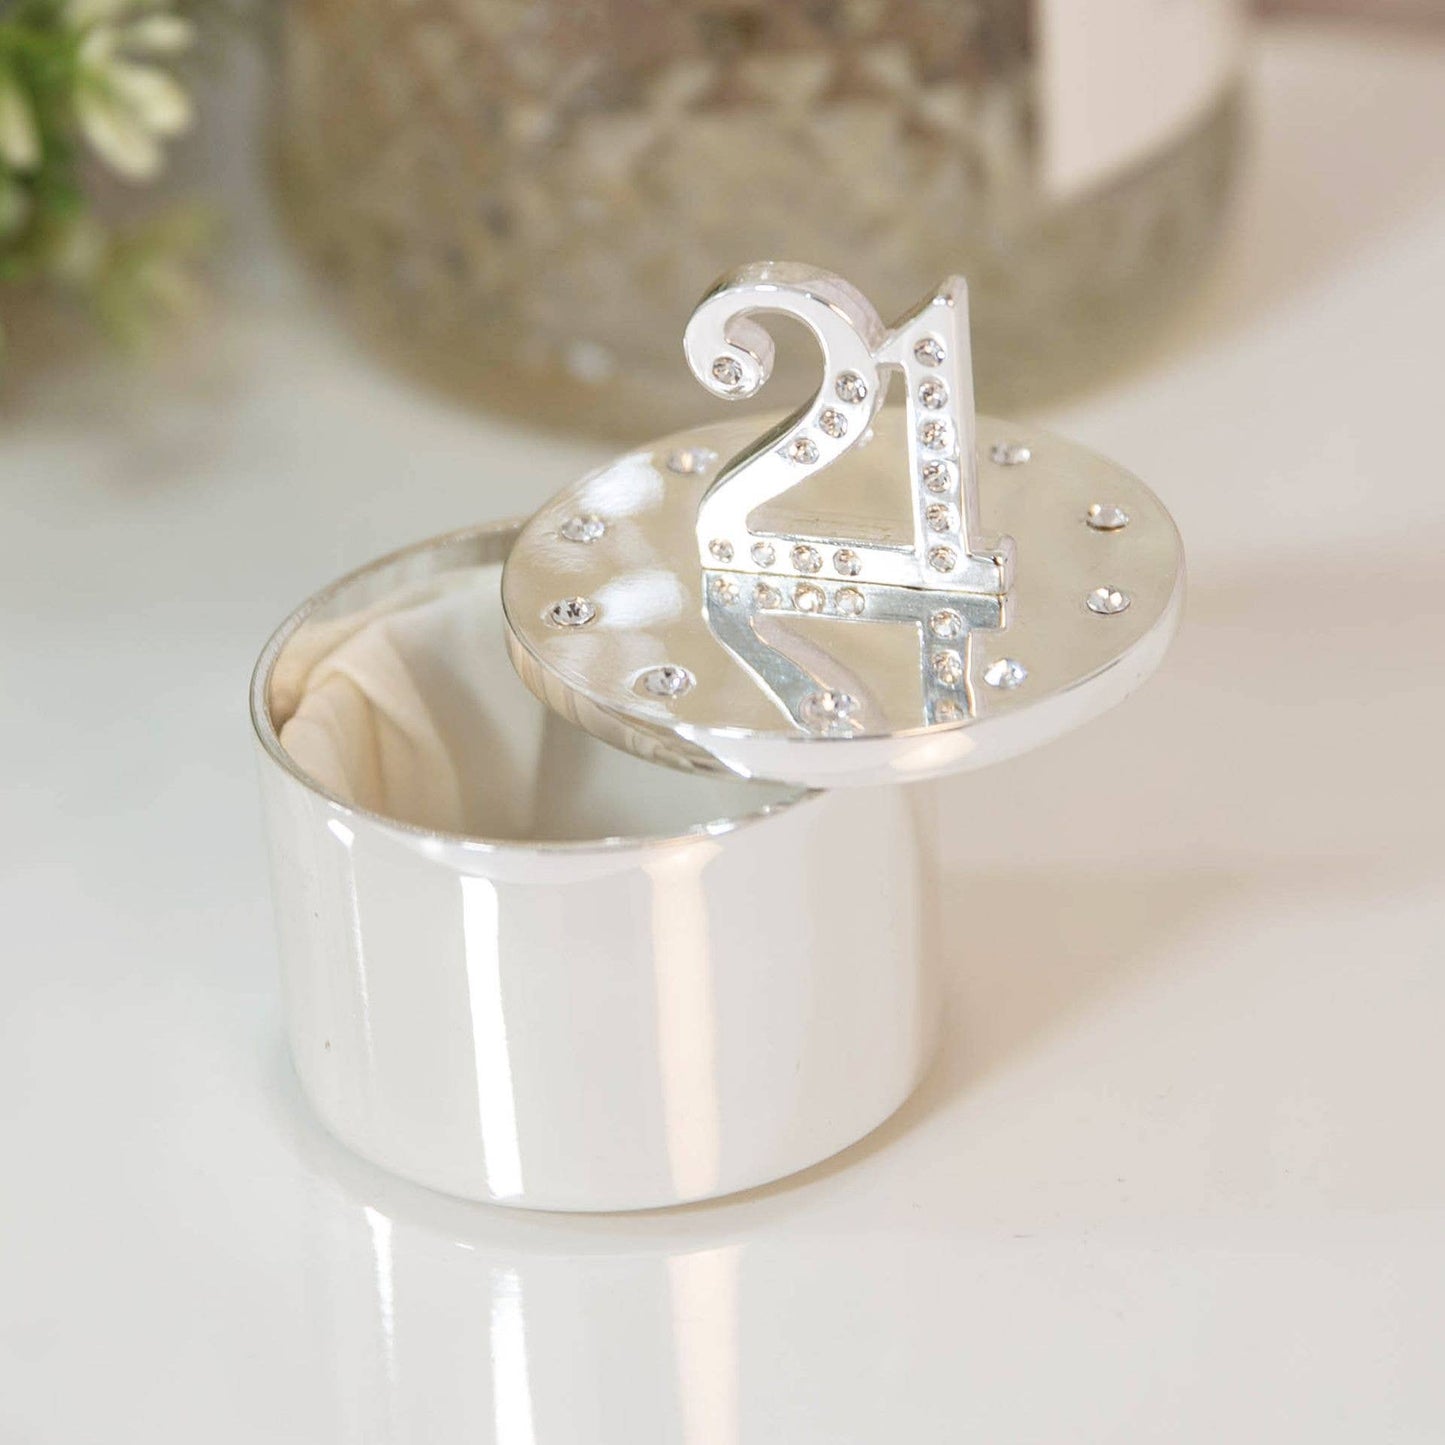 WIDDOP and Co. - Milestones Silverplated Trinket Box With Crystal 21